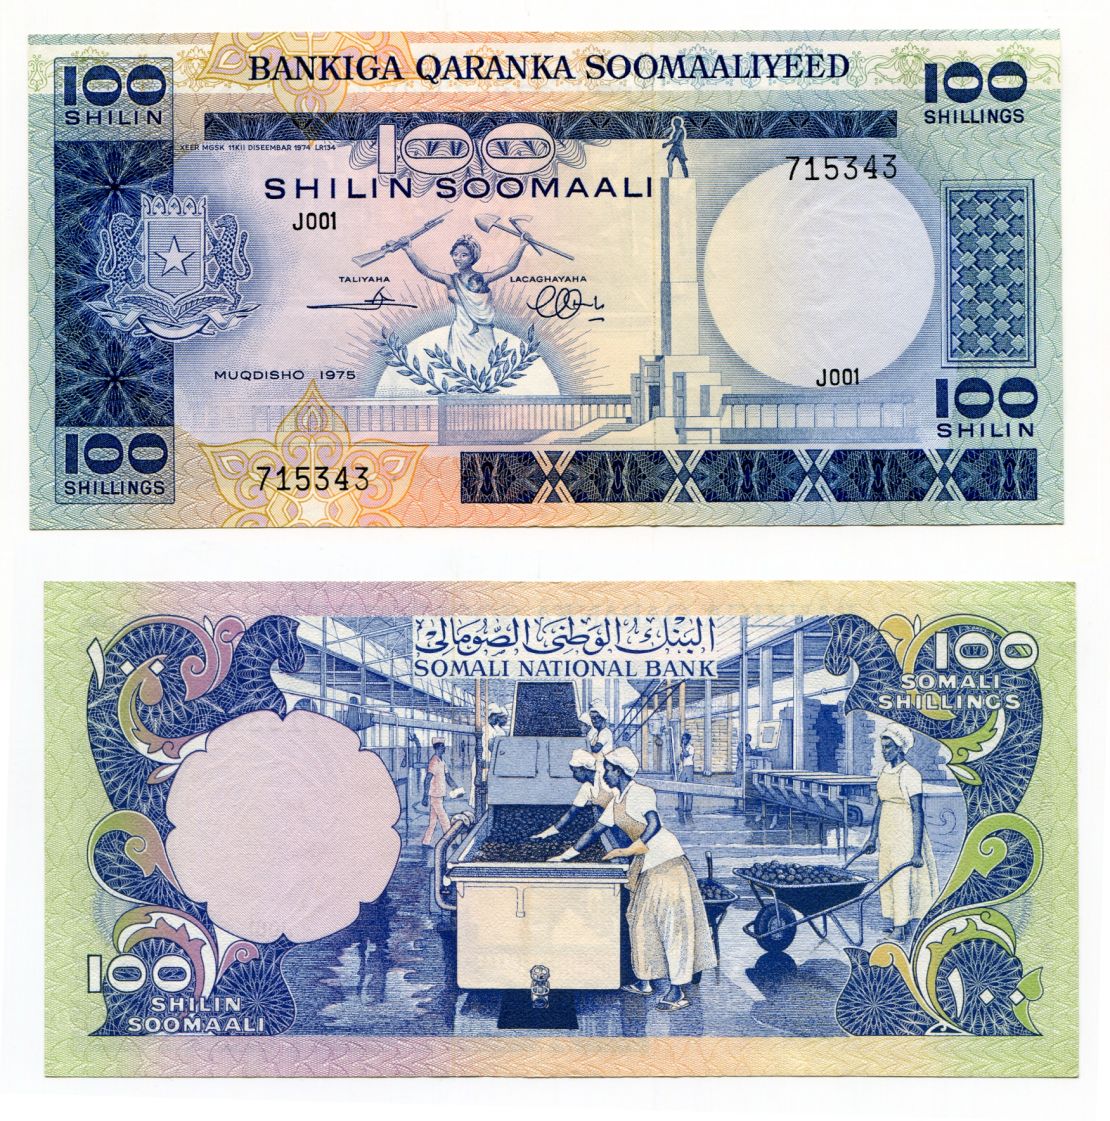 This banknote from Somalia was designed to empower women and show them the things they could achieve through communism, such as finding work and being part of the military. 